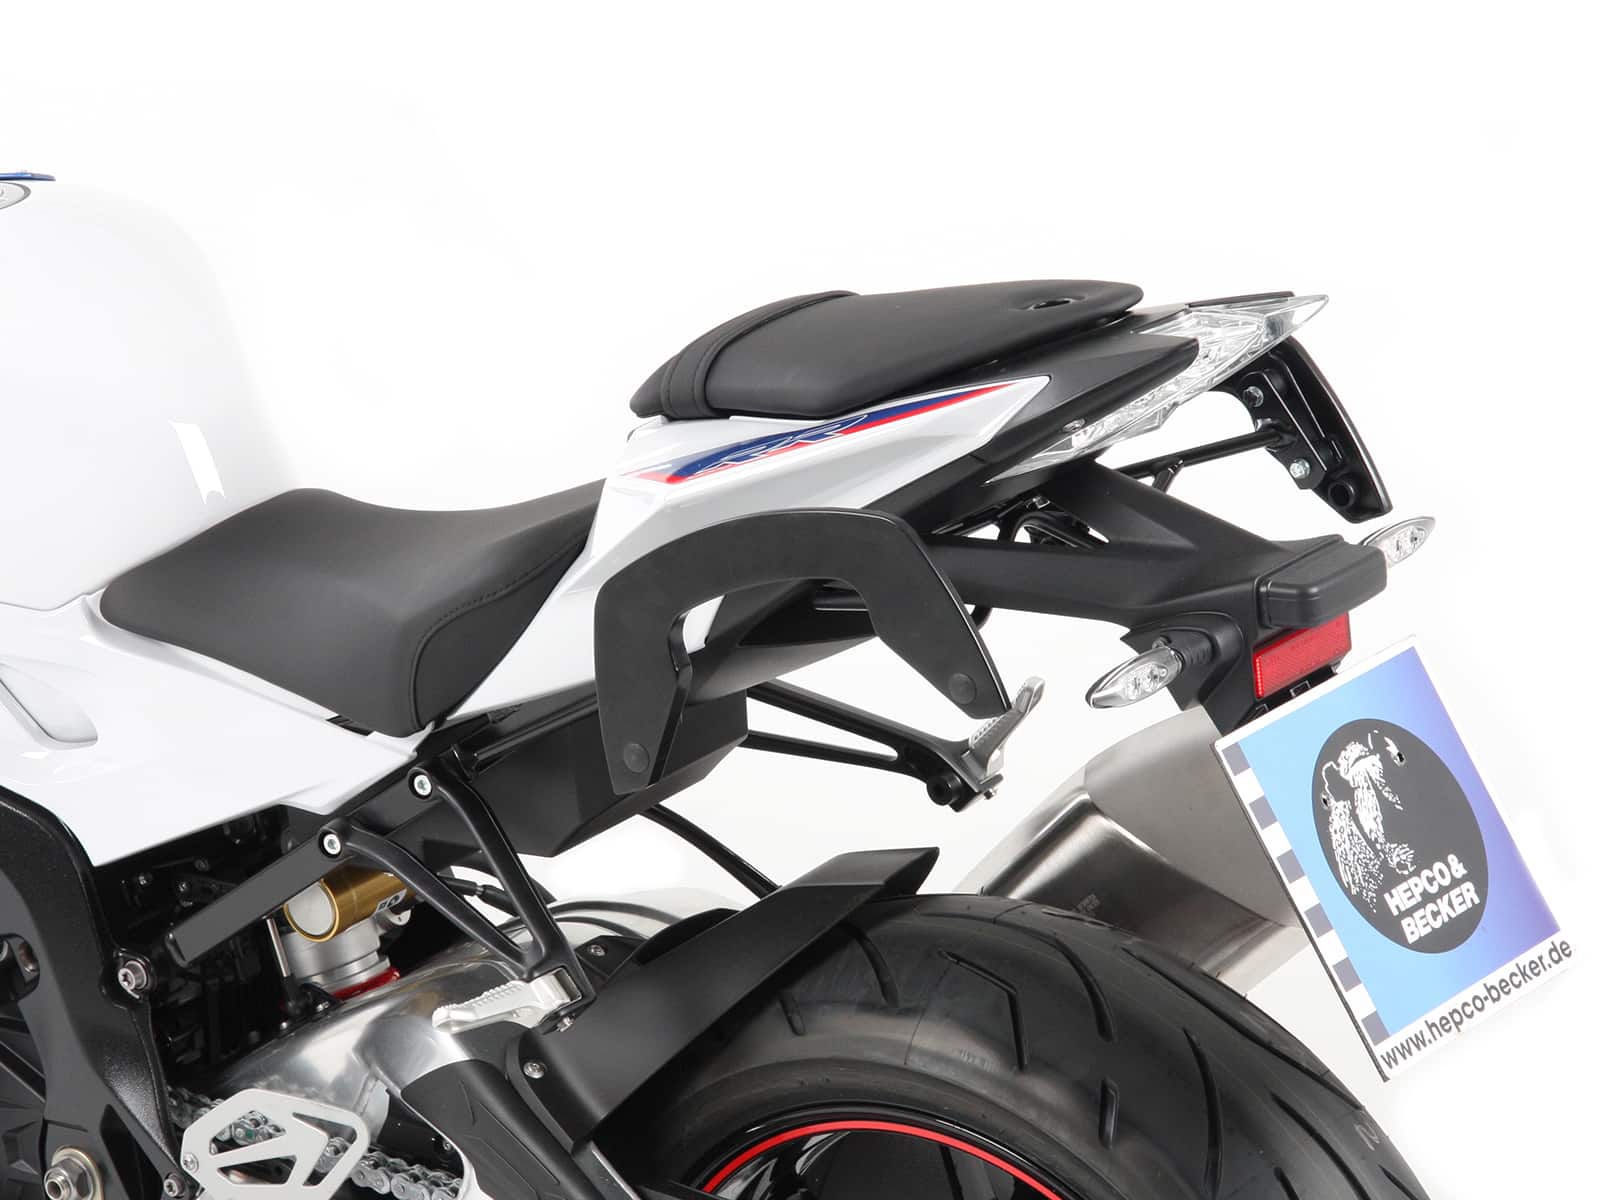 C-Bow sidecarrier for BMW S 1000 RR (2016-2018)